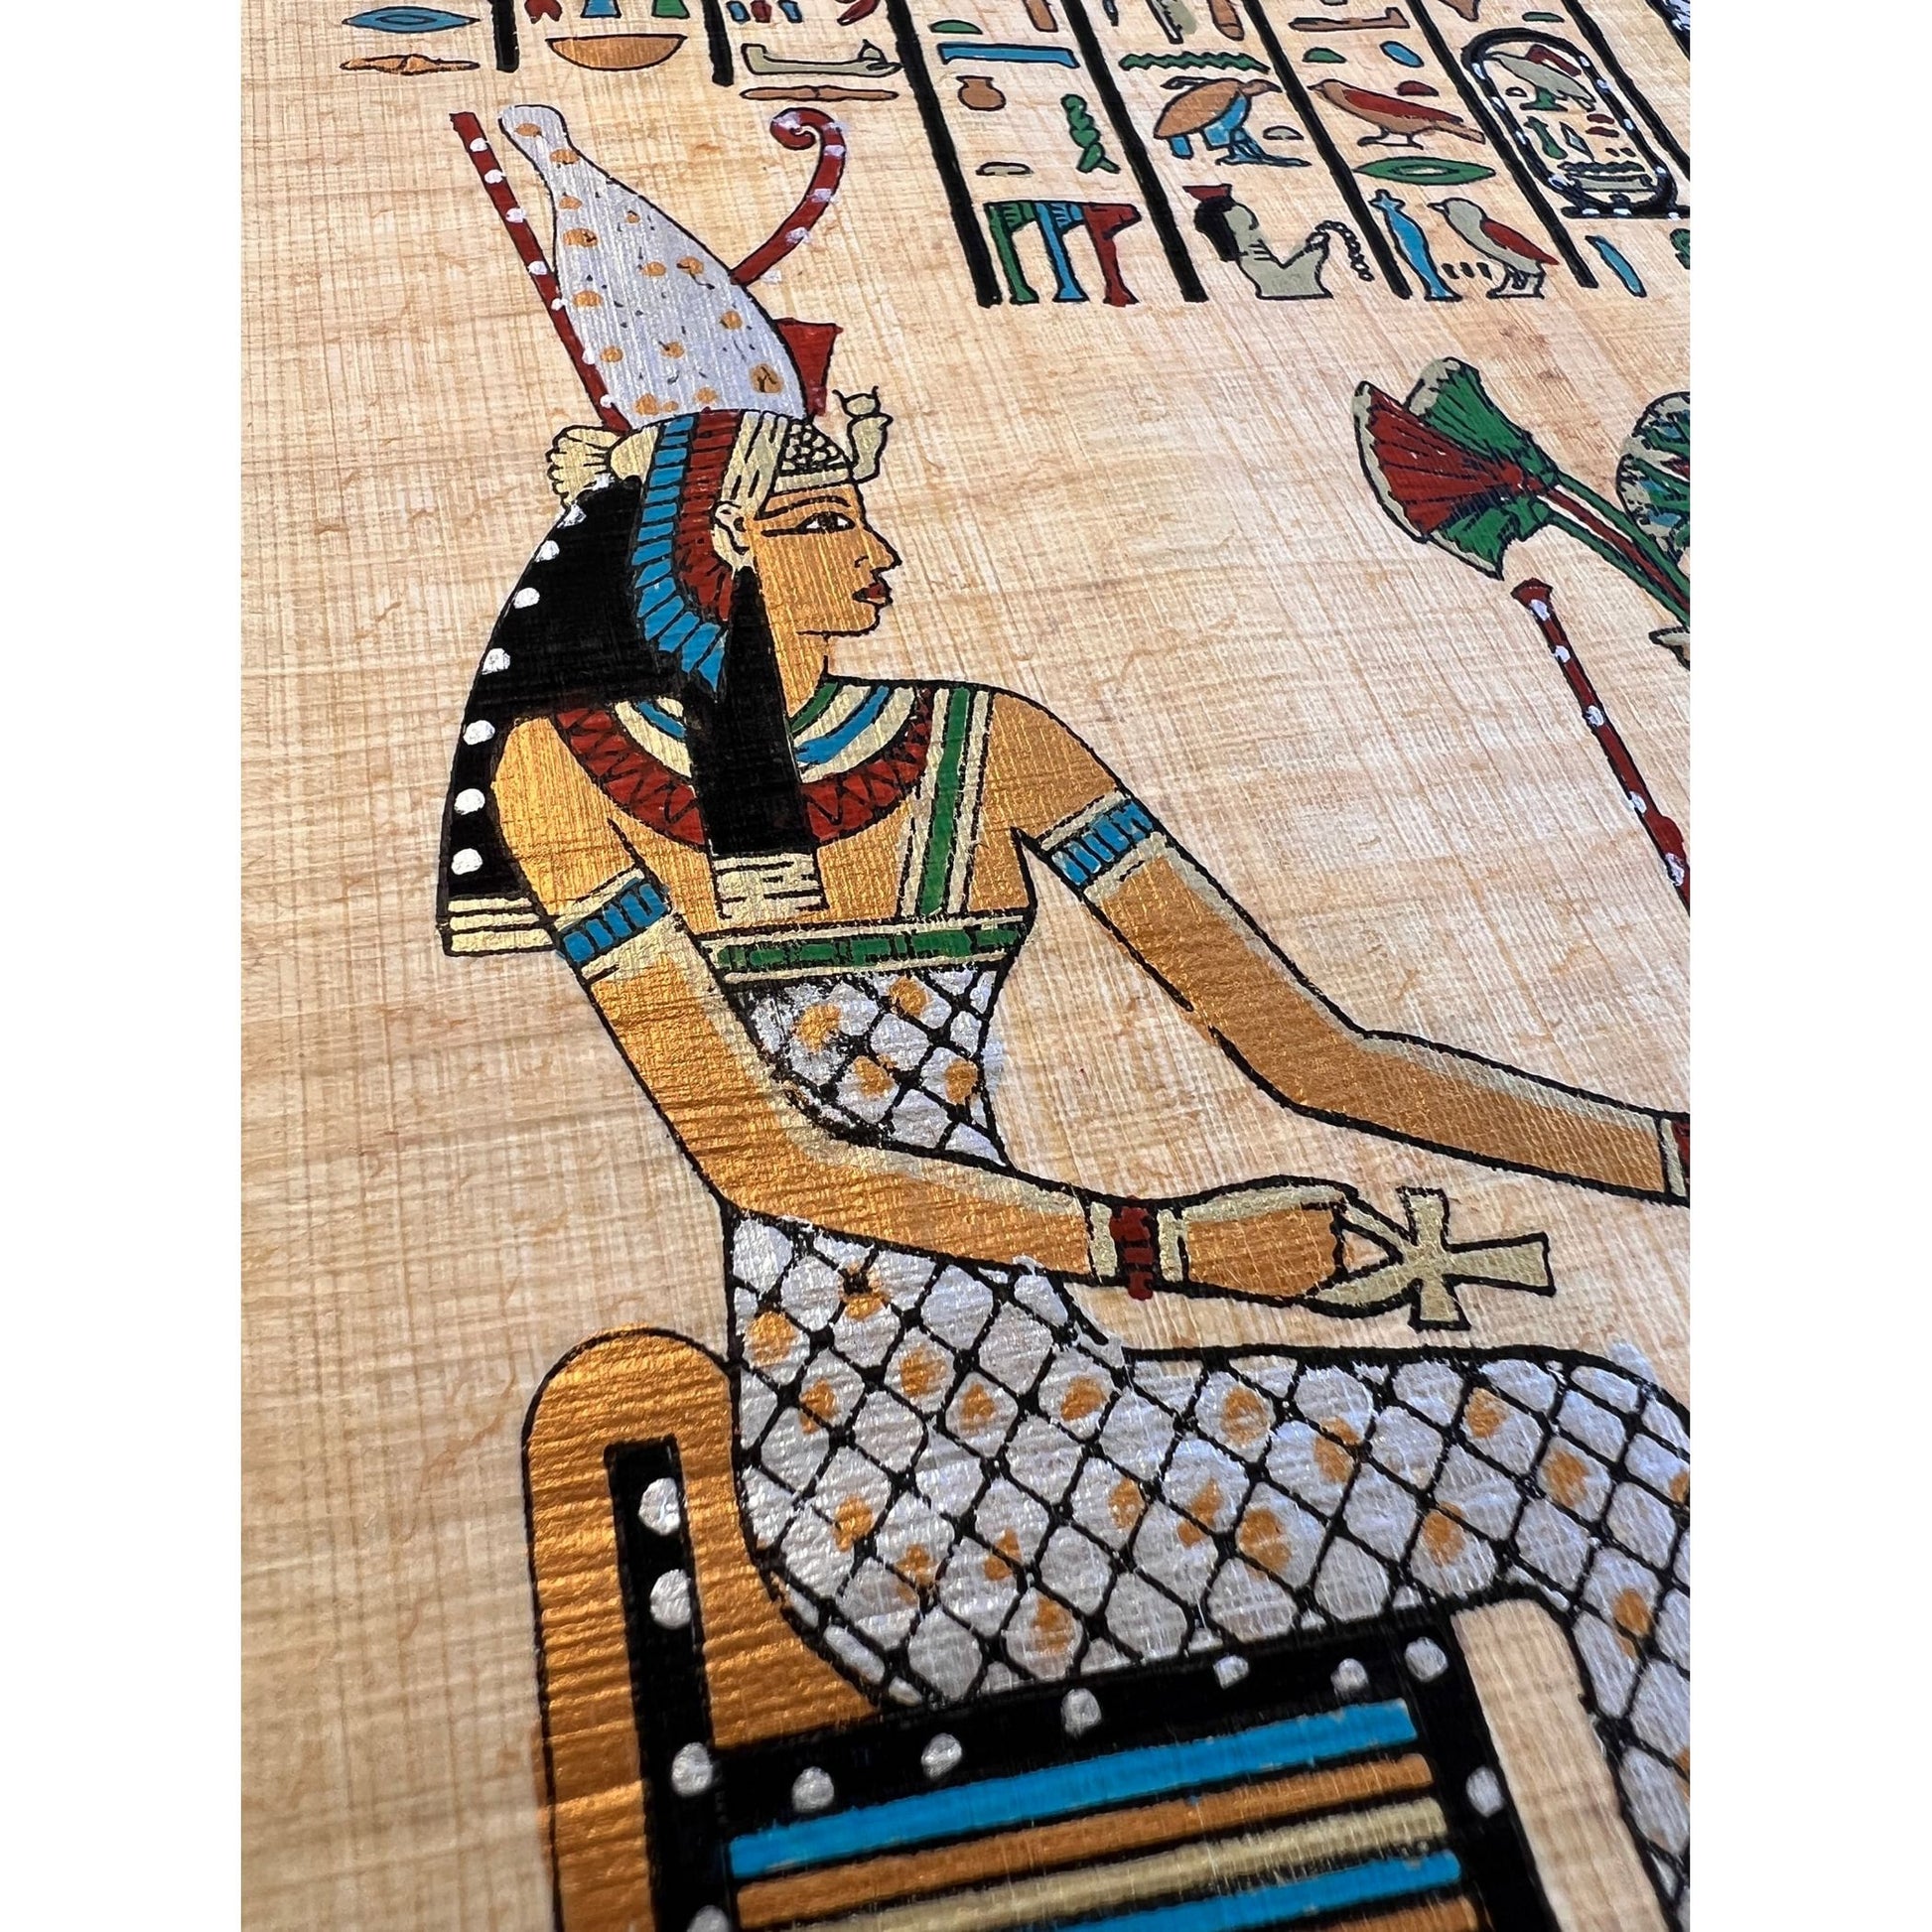 Queen Nefertari Offering Flowers, a Symbol of Love in Ancient Egypt, Egyptian Decor, Wall Art Papyrus